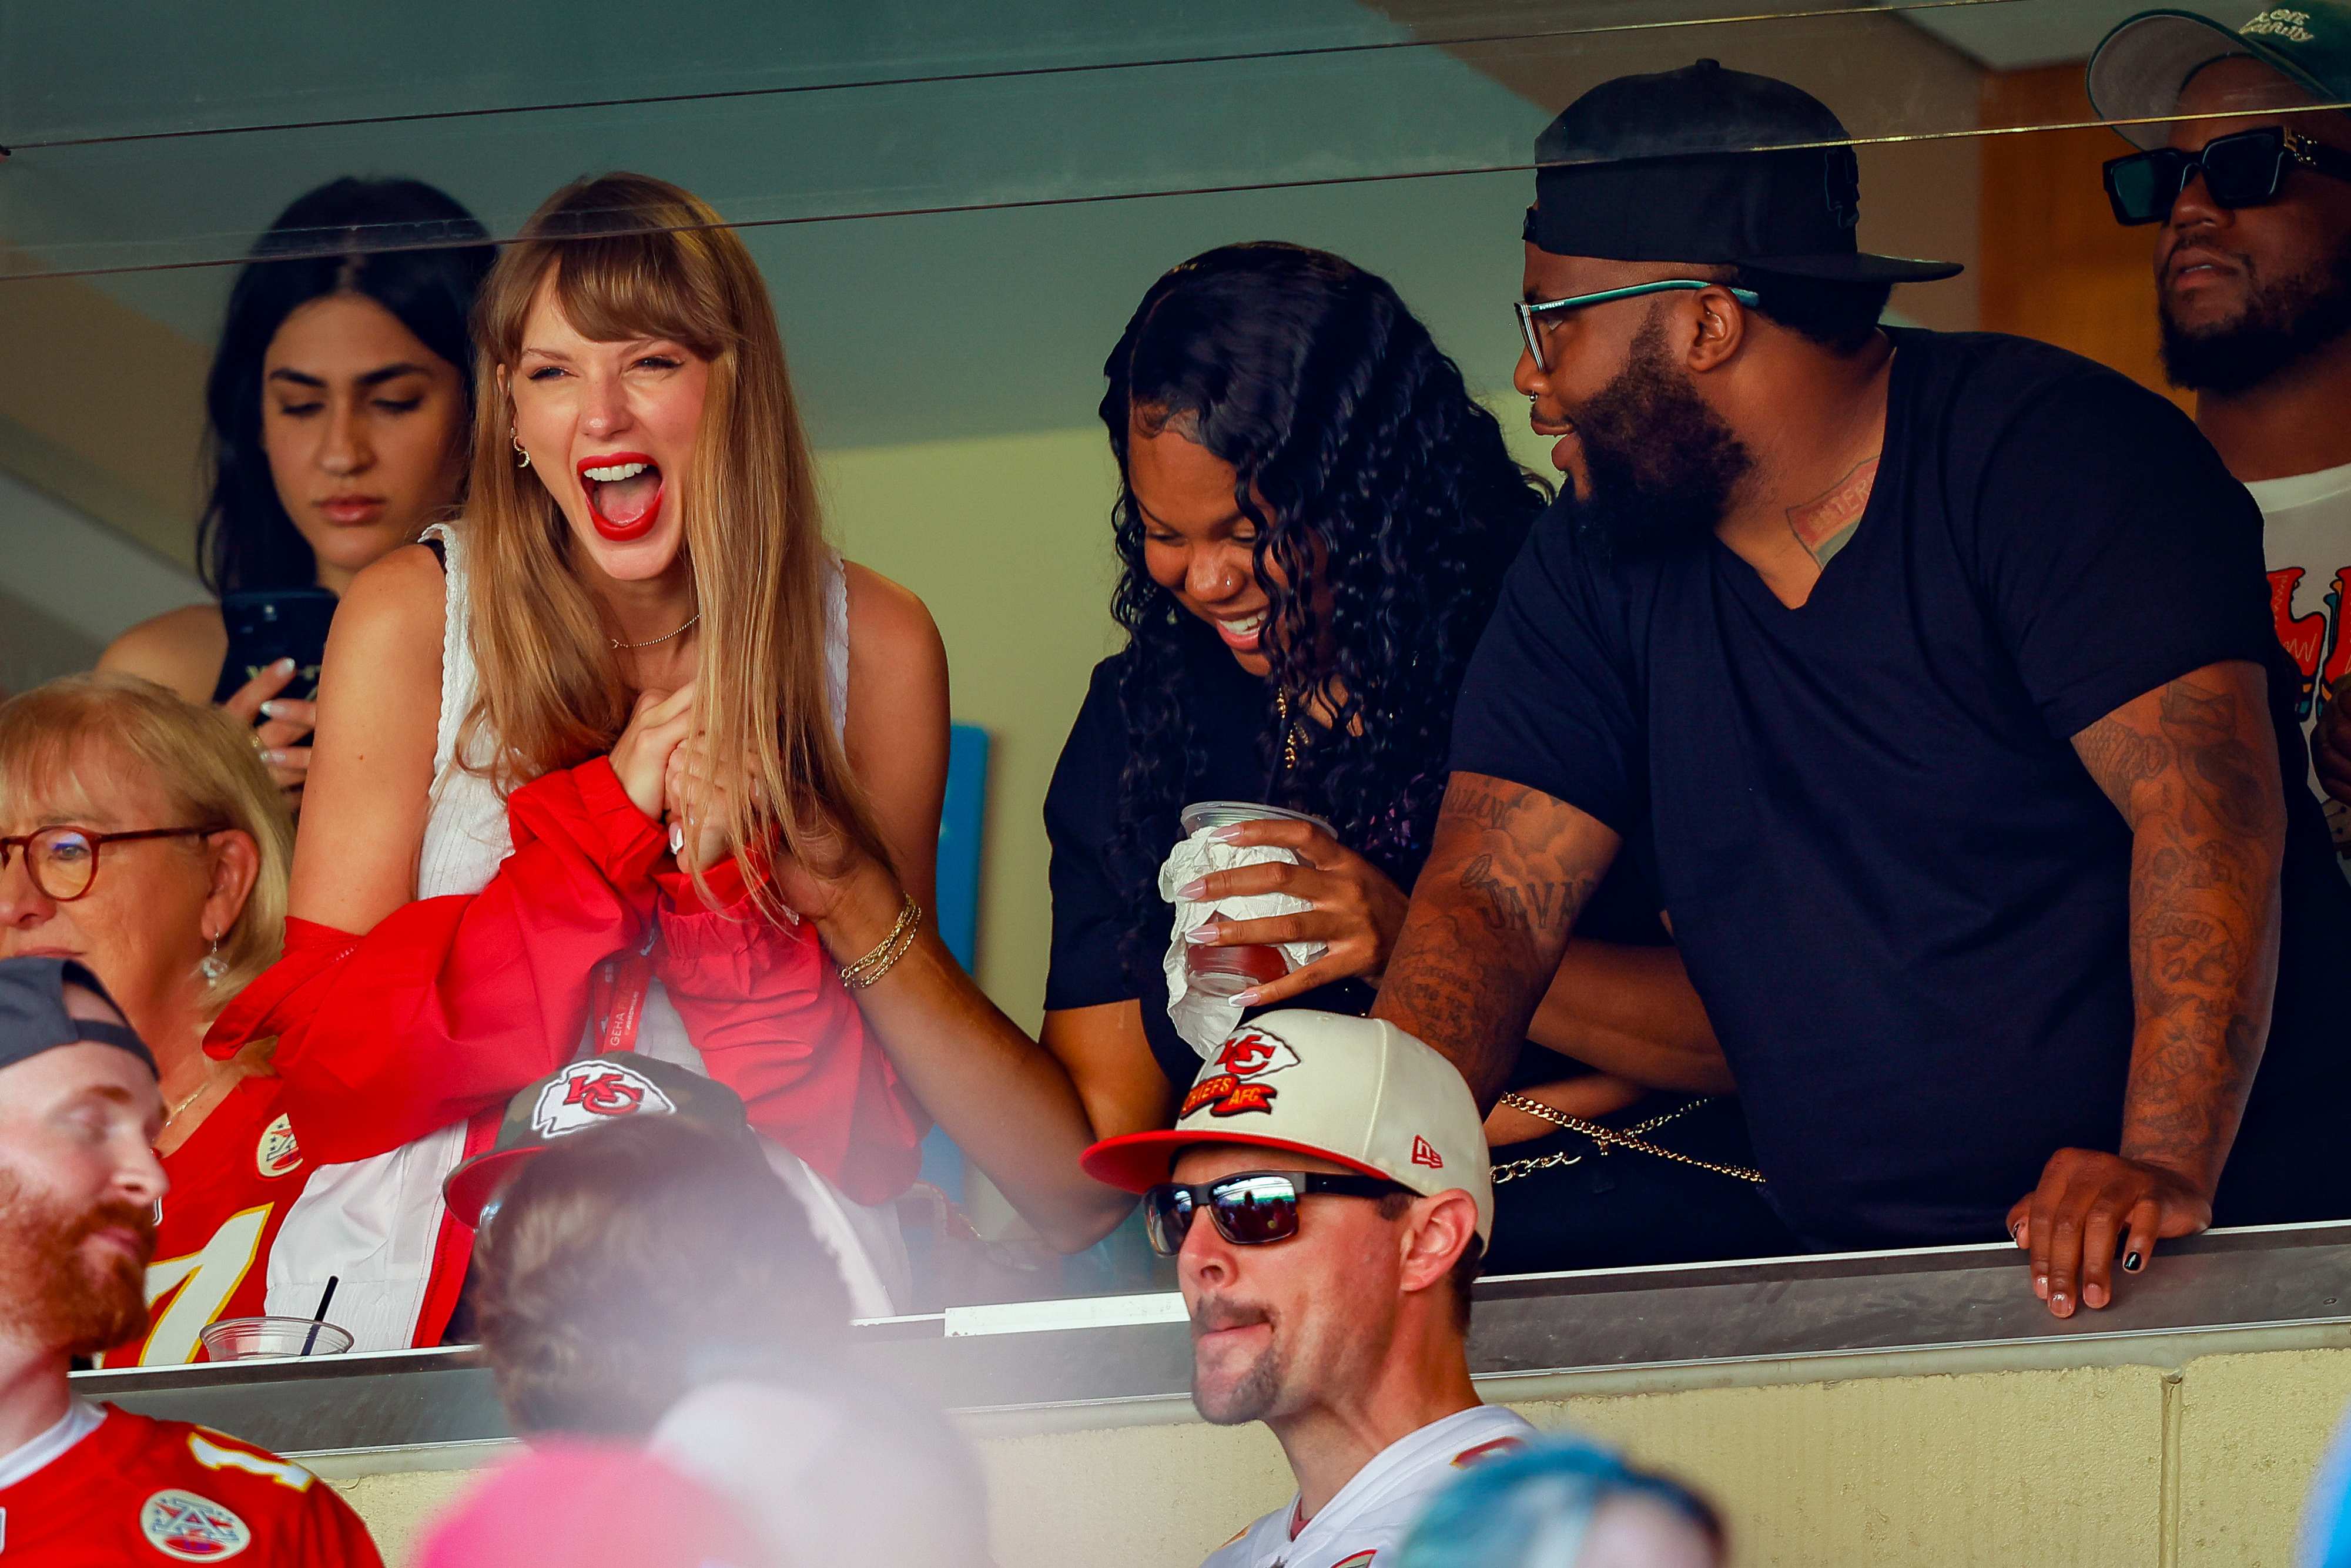 Taylor at the game with friends